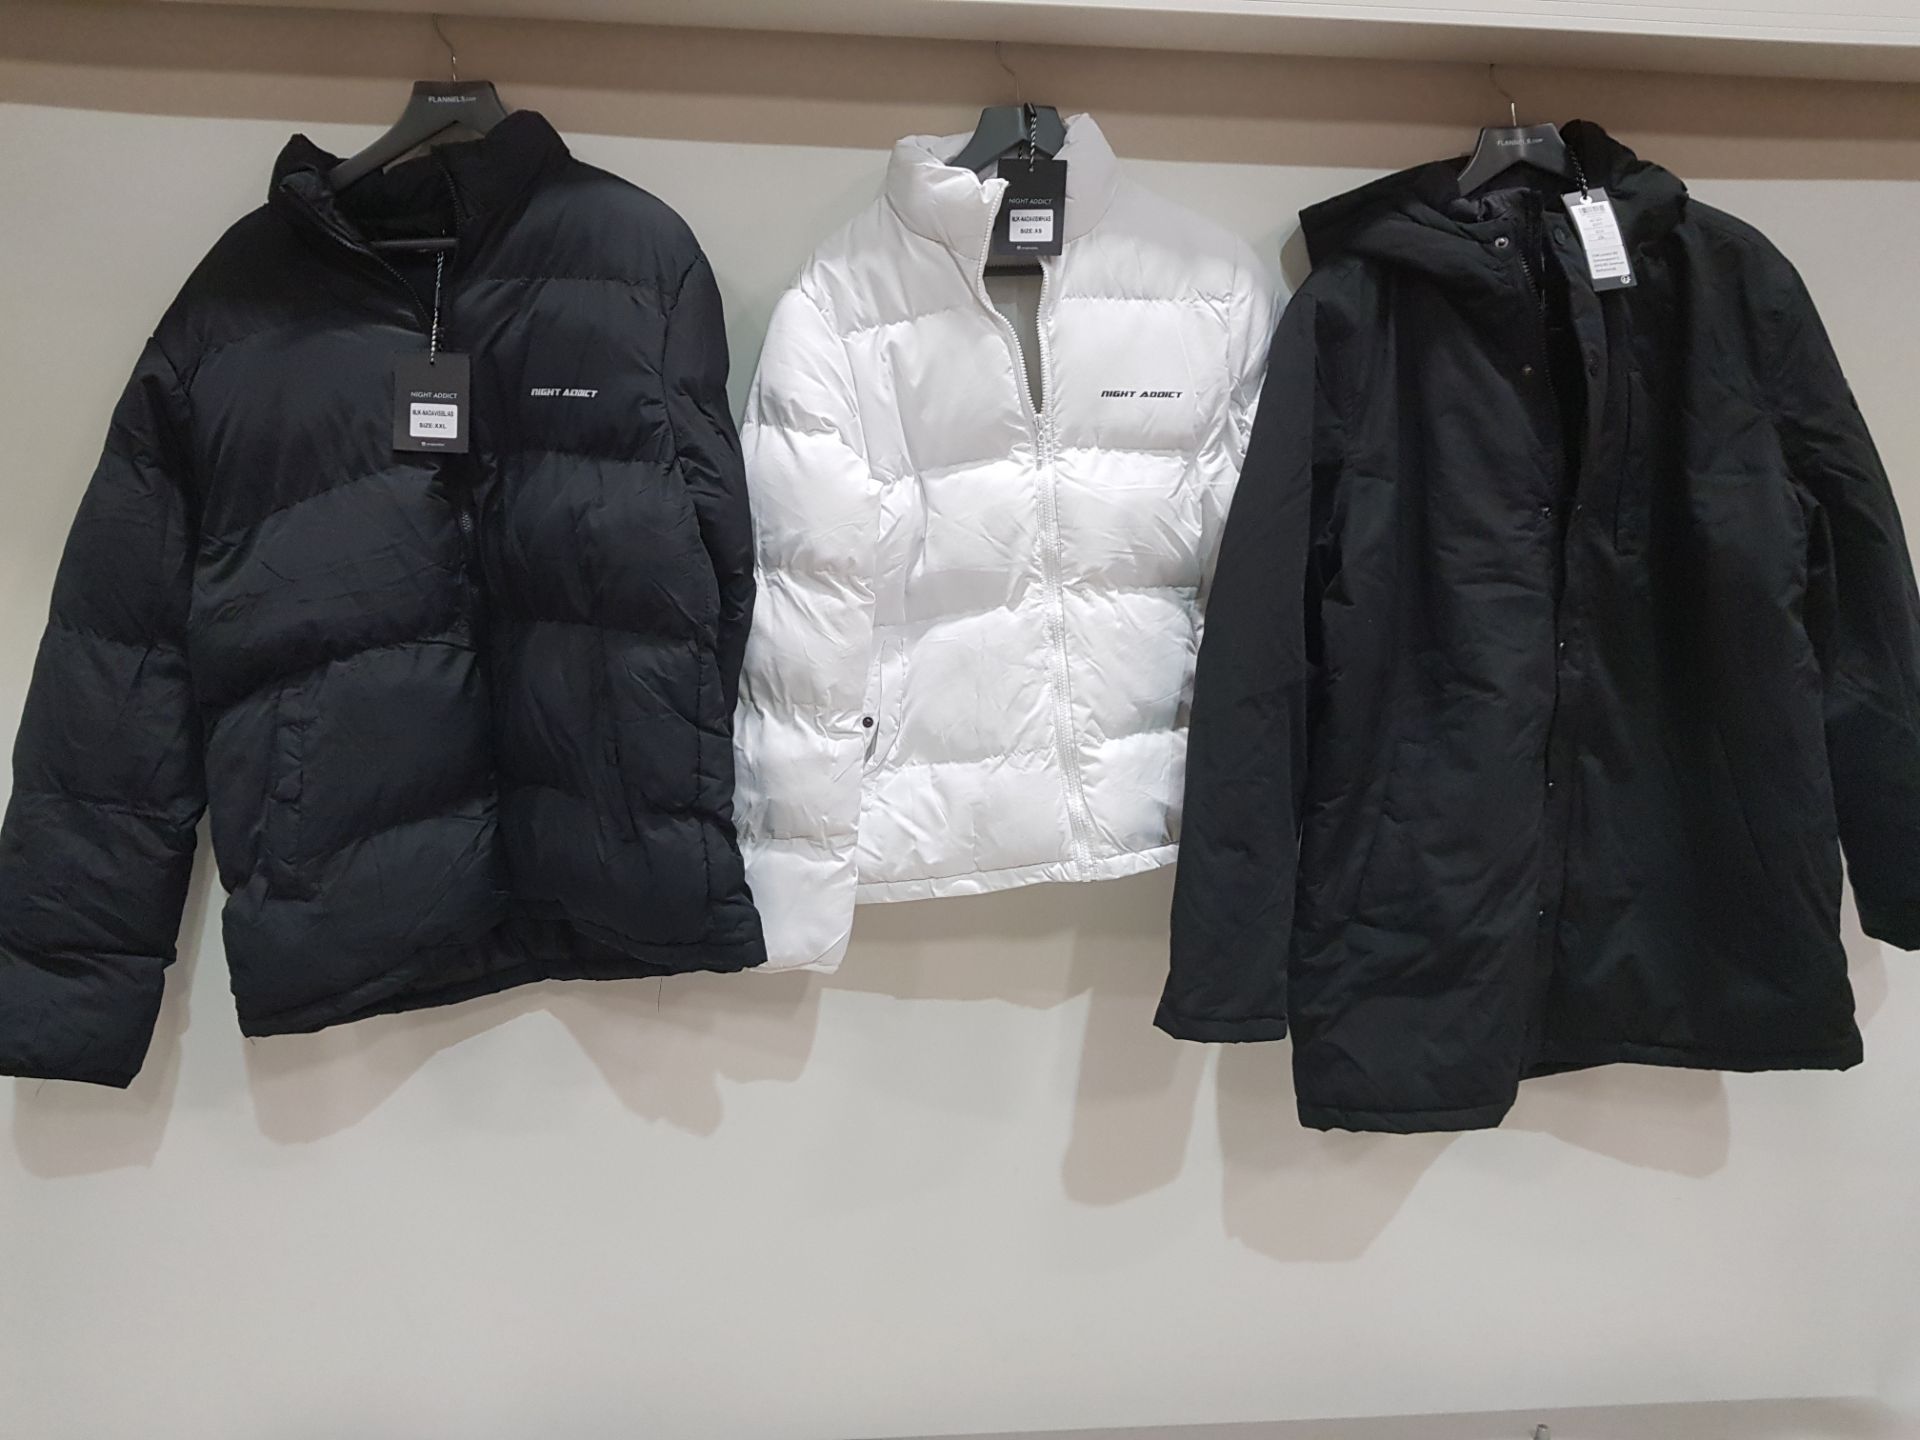 5 X BRAND NEW MIXED CLOTHING LOT CONTAINING - JACK AND JONES BLACK QUILTED PUFFER COAT SIZE